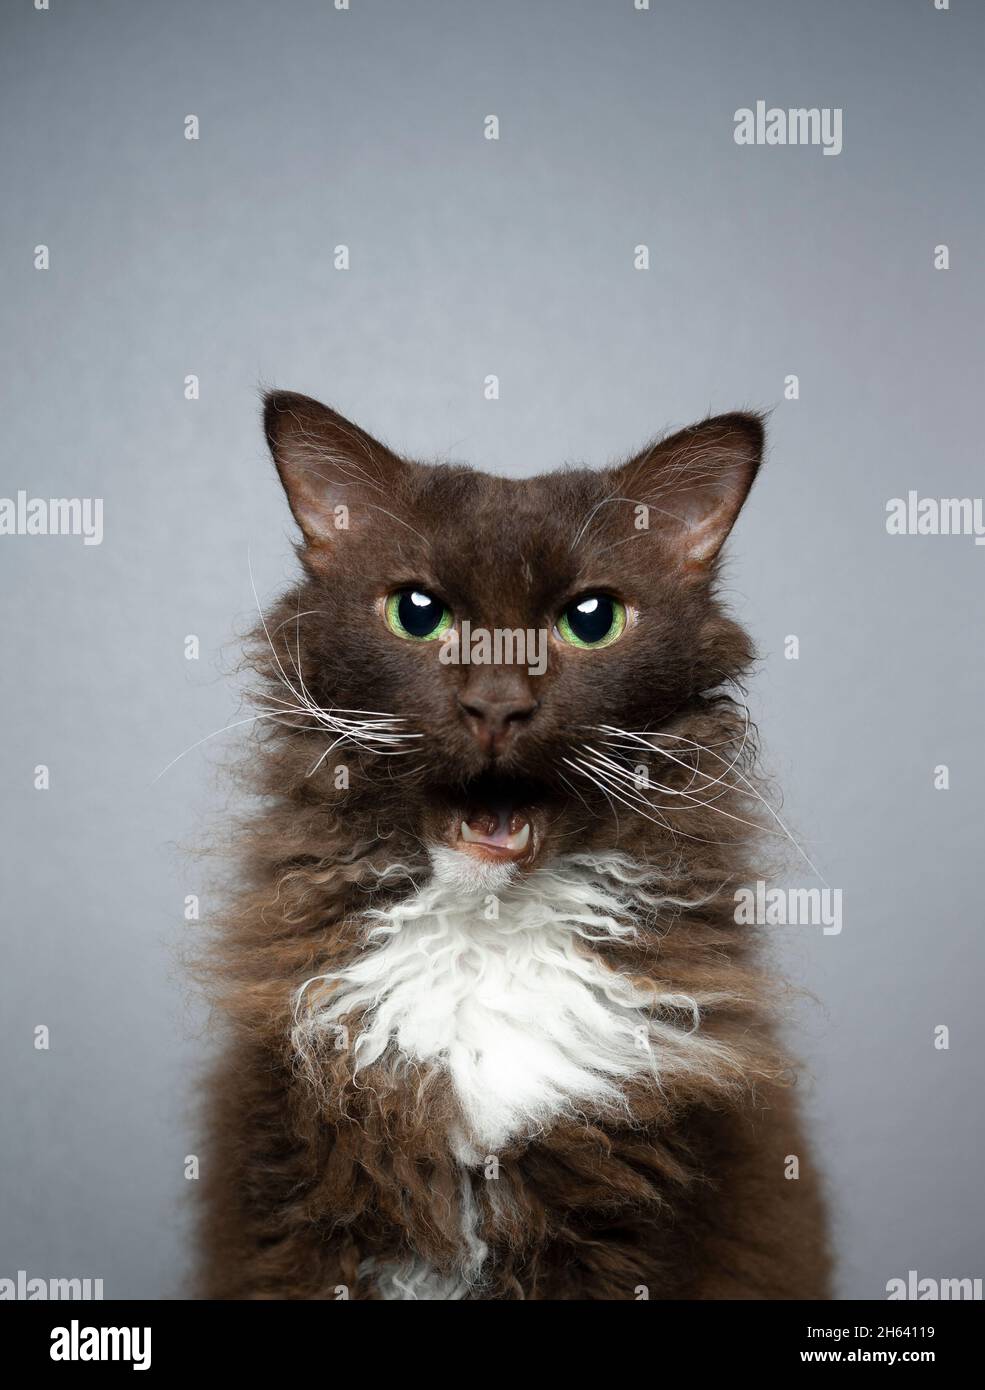 chocolate white brown laperm cat with curly long fur looking at camera with mouth open making funny face Stock Photo